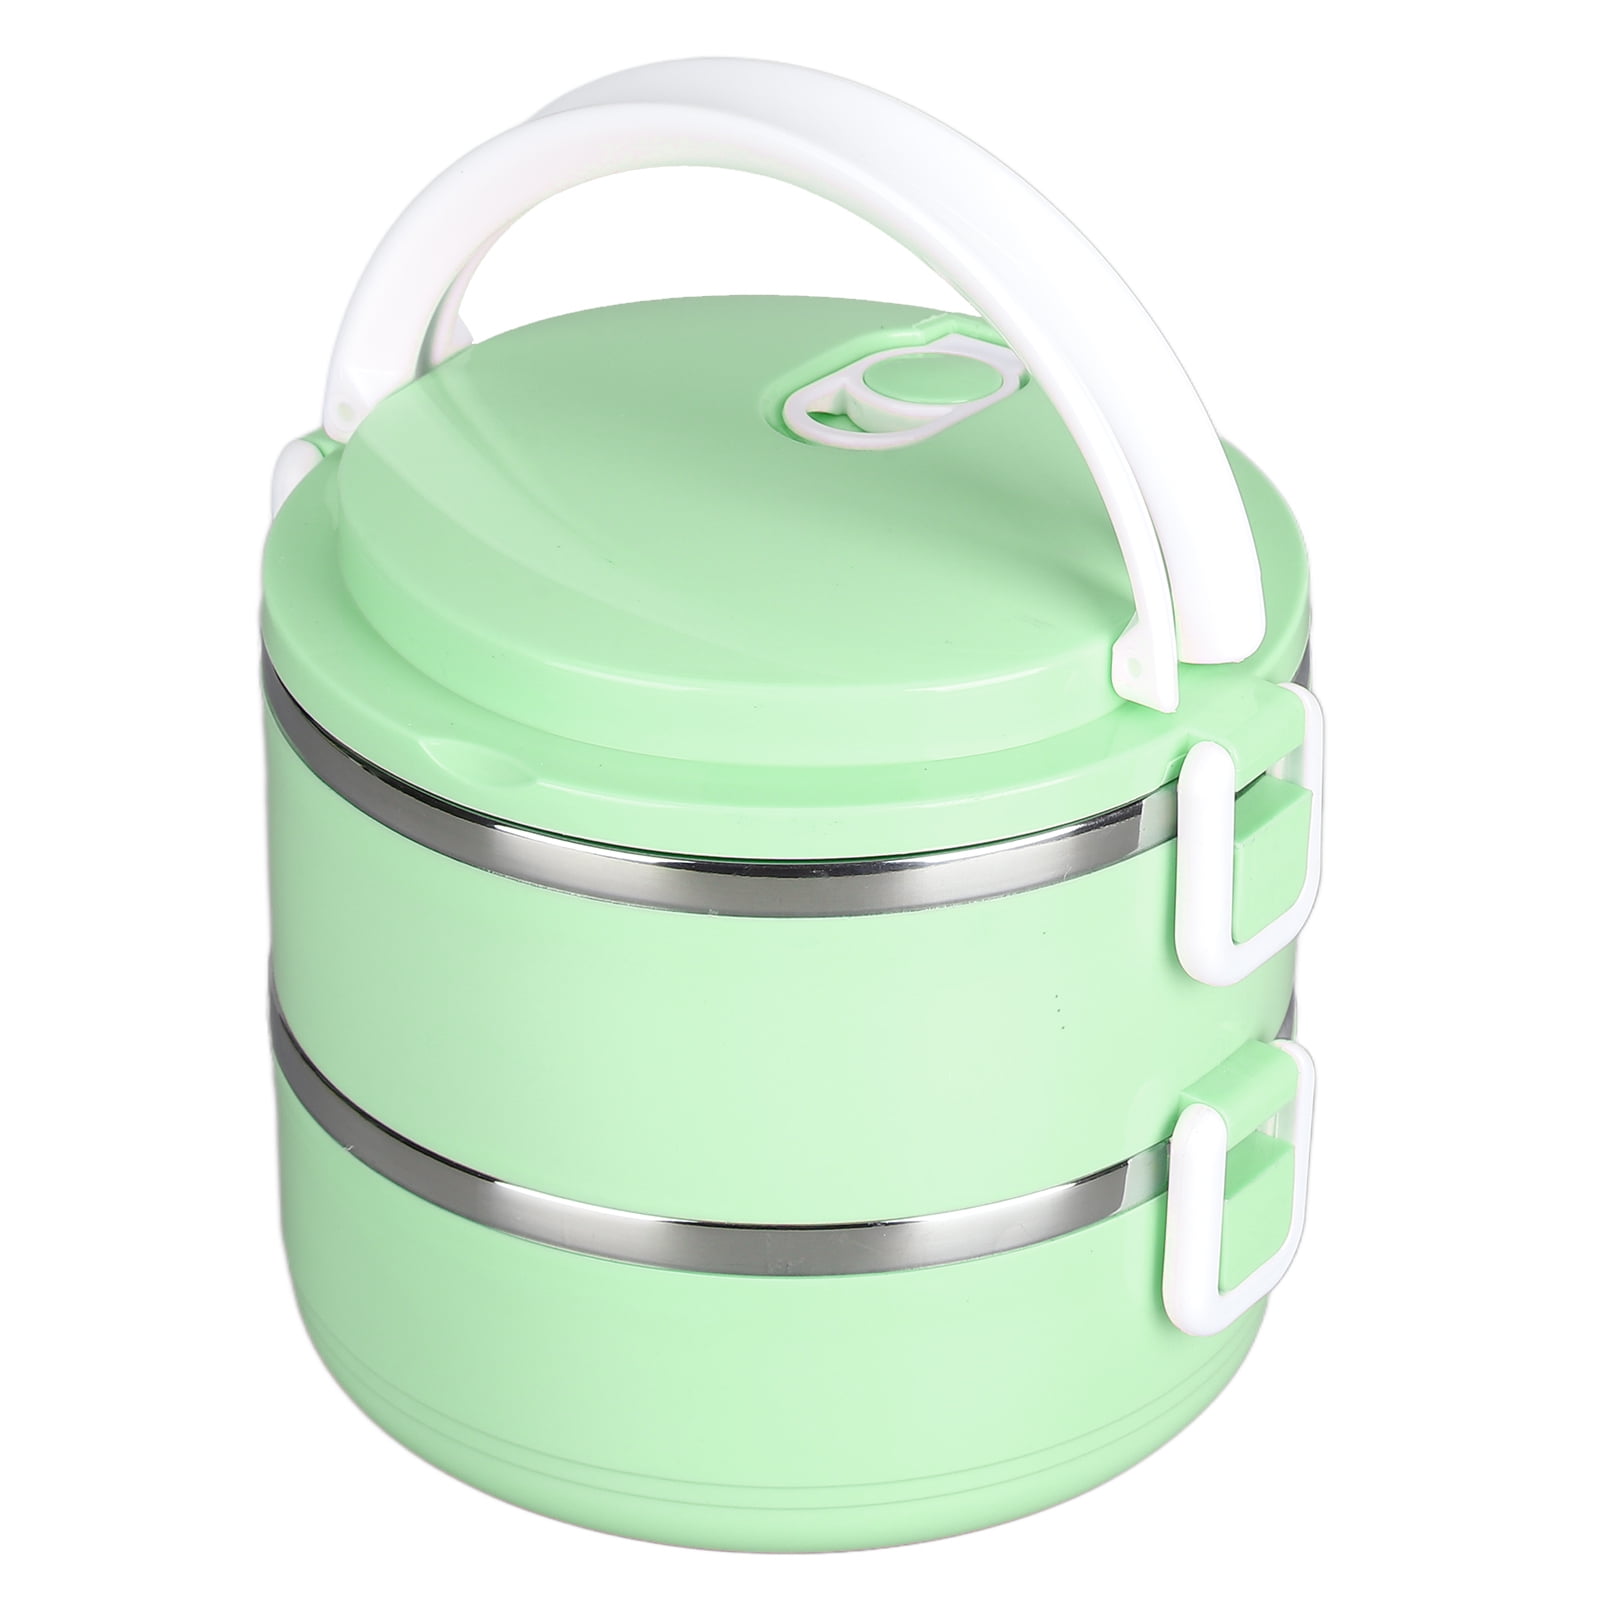 XMMSWDLA Preppy Lunch Box Green Lunch Box304 Stainless Steel Mini